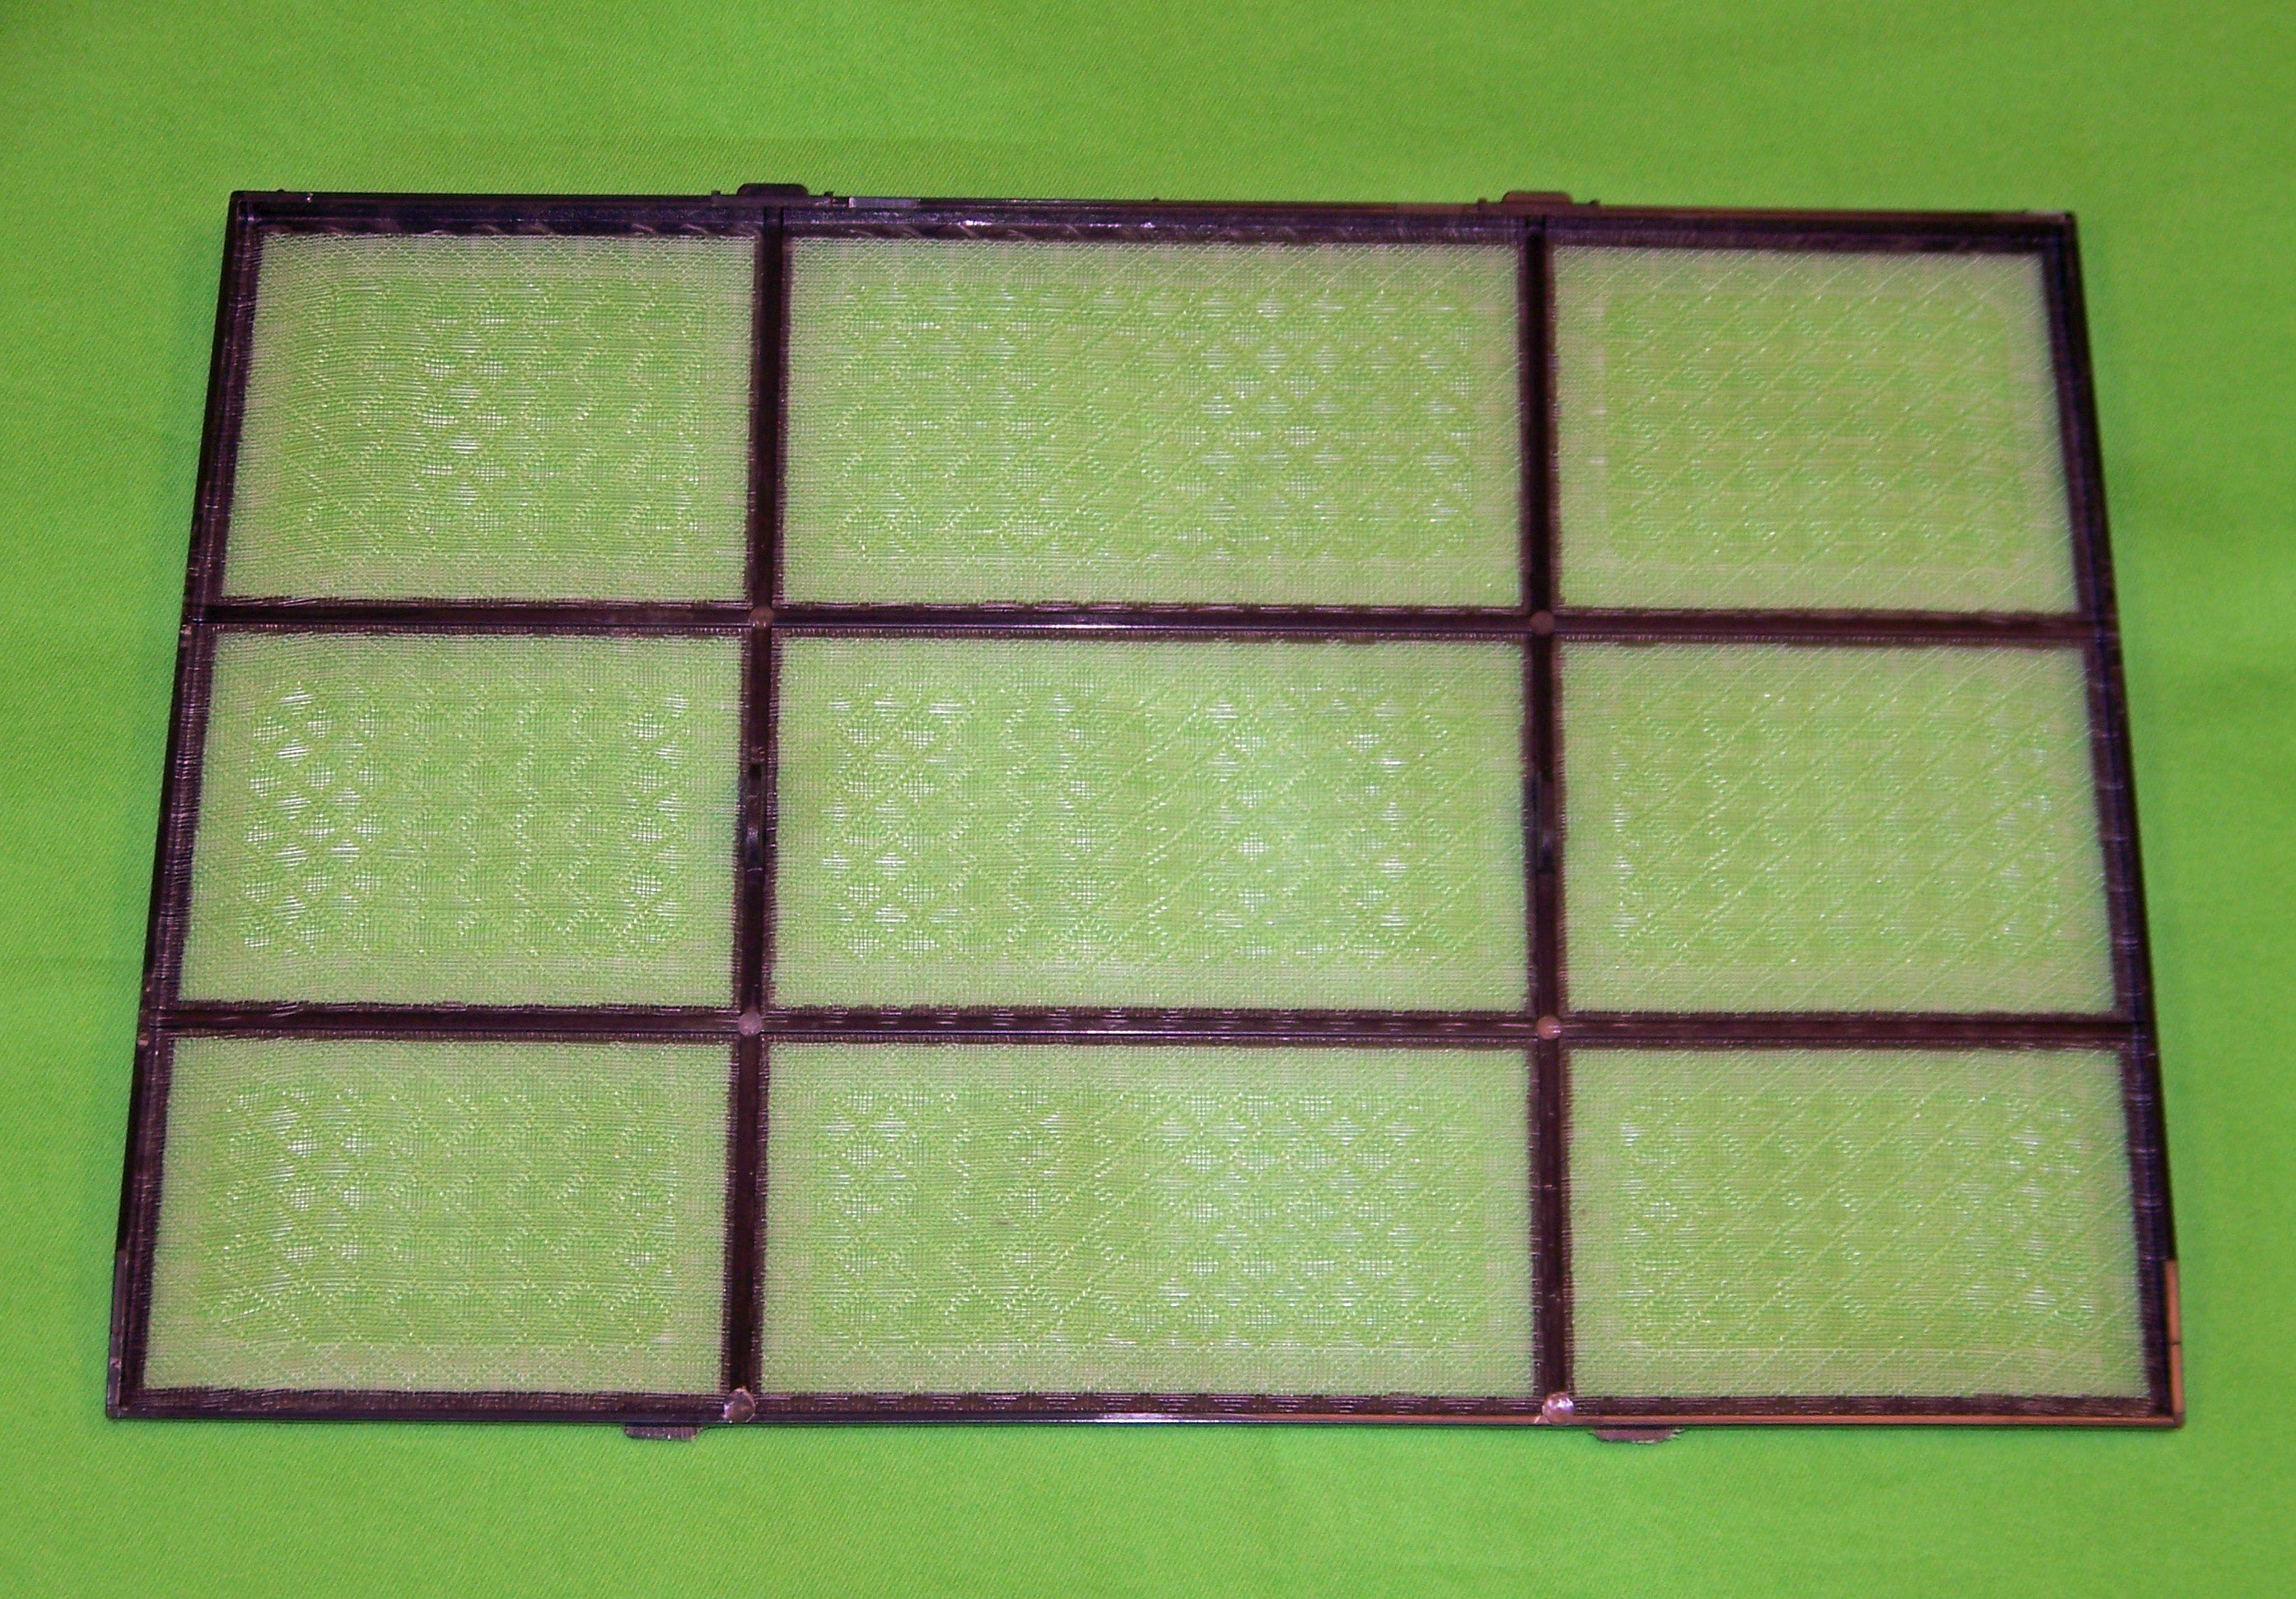 OEM Delonghi Air Conditioner Filter Originally Shipped With: PACAN125HPEC, PACAN130HPEL